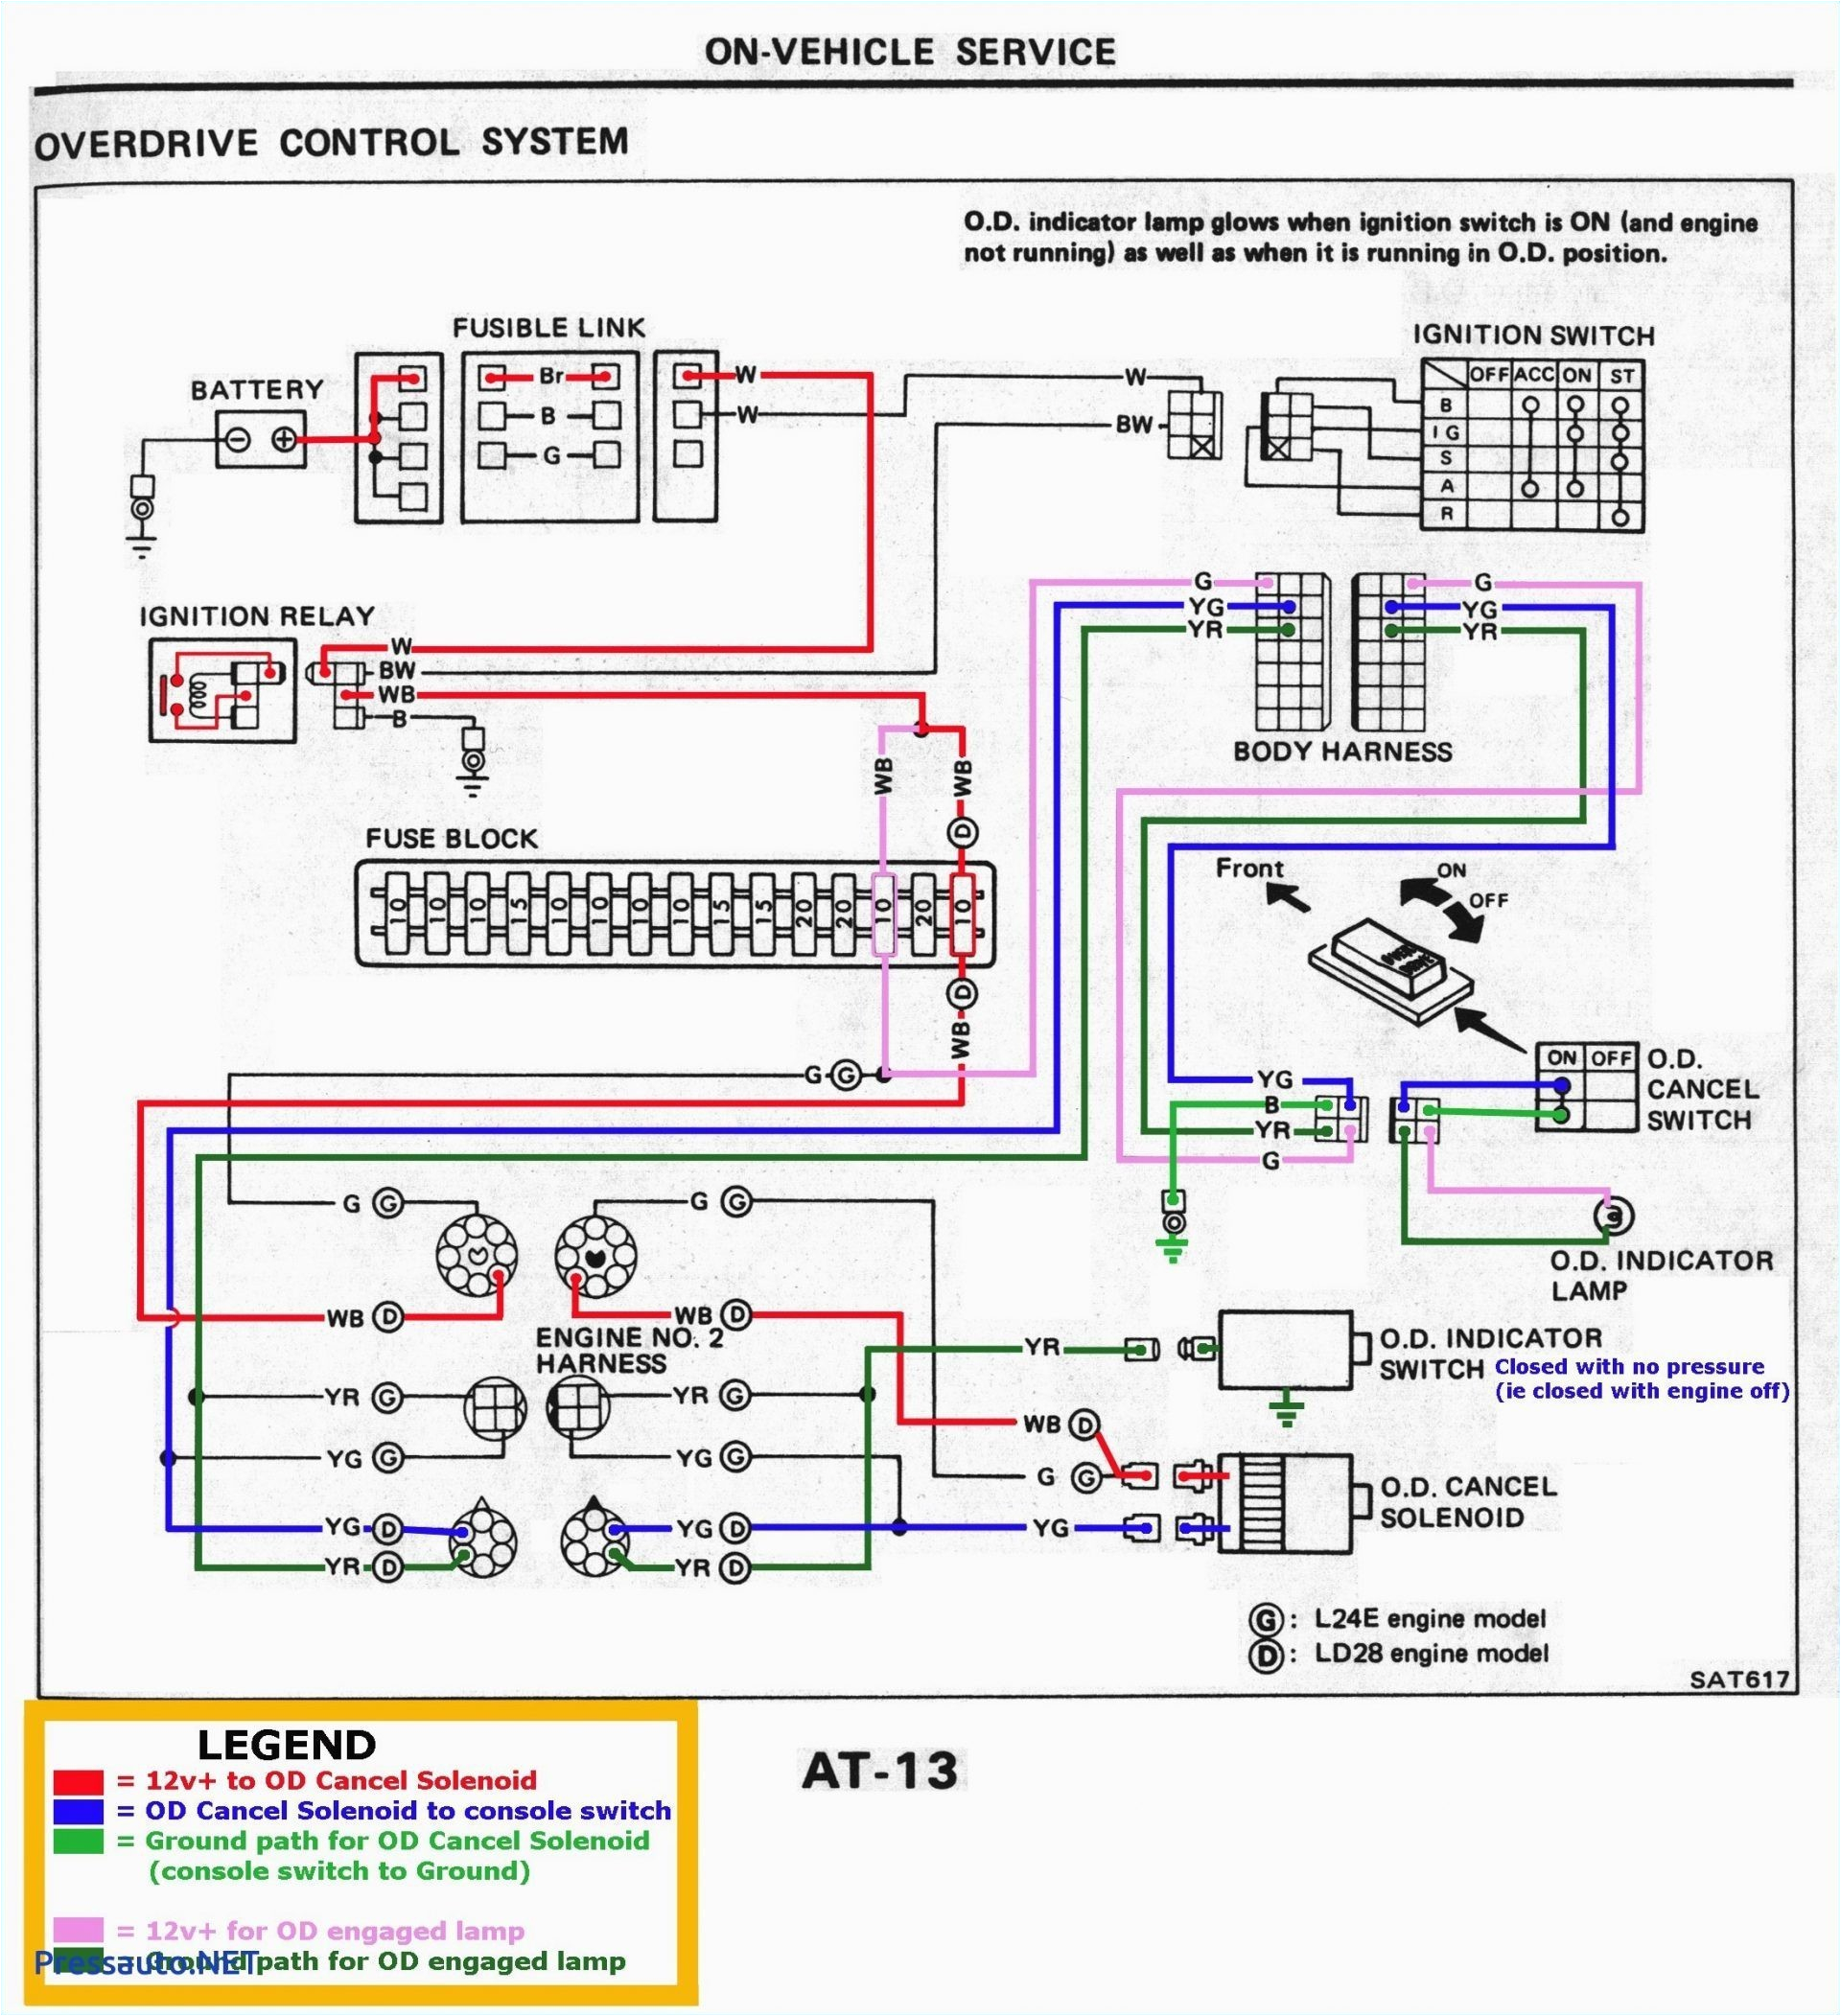 2002 jeep liberty wiring diagram wiring diagram for 2003 jeep grand cherokee wiring diagram used of 2002 jeep liberty wiring diagram jpg